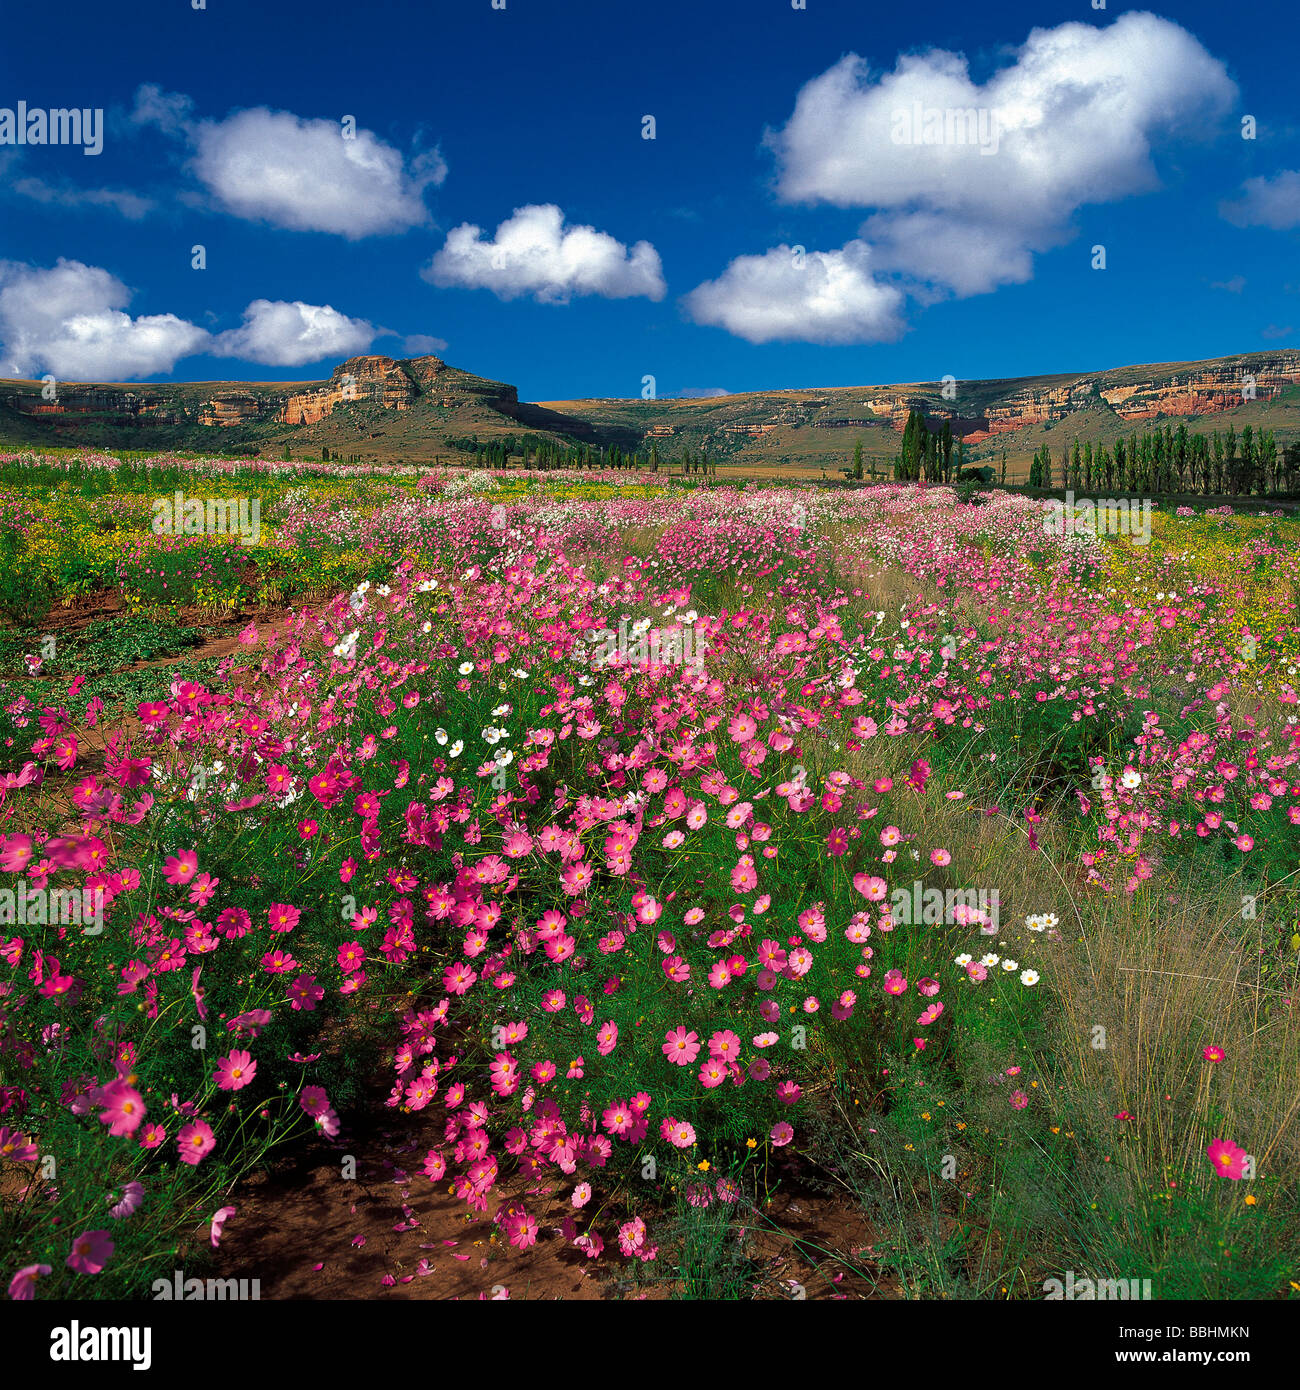 ACRES OF DELICATE COSMOS BLOOMS DECORATE THE COUNTRYSIDE OF THE EASTERN FREESTATE Stock Photo